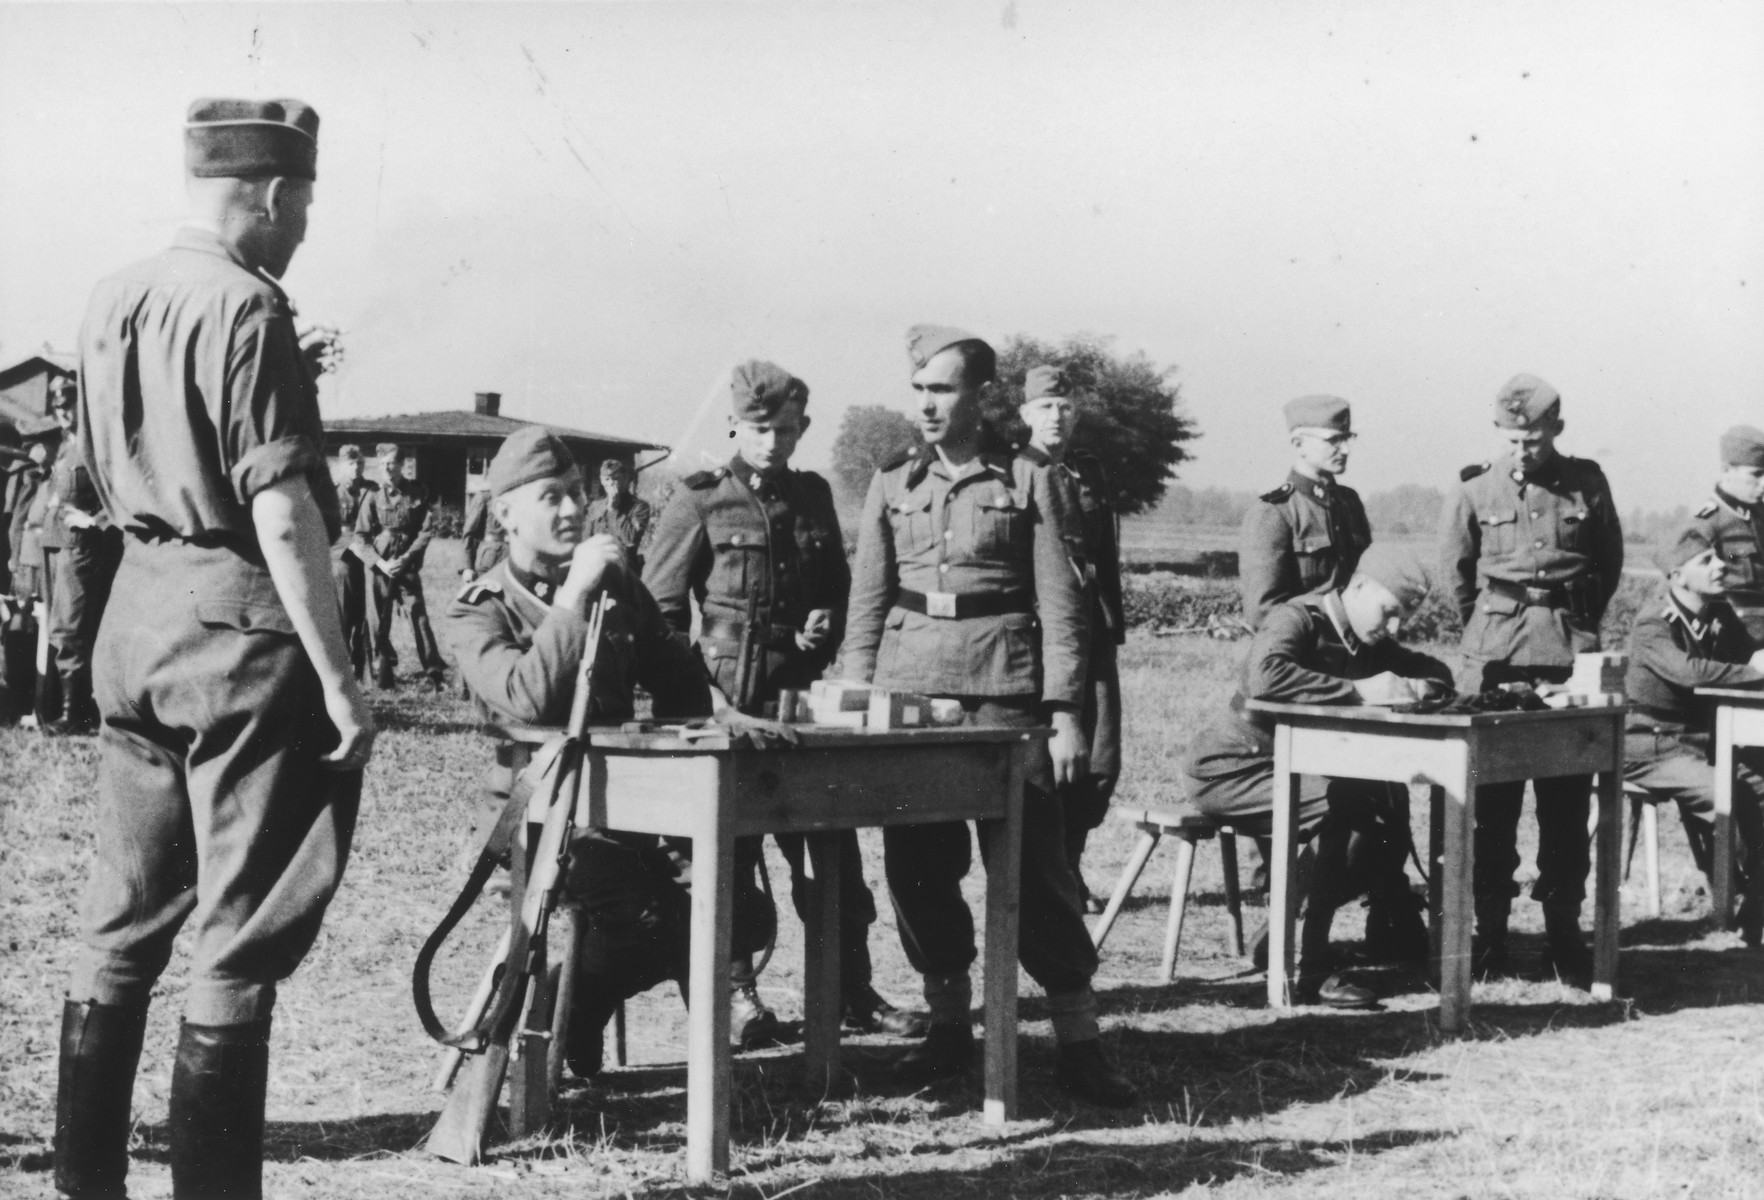 SS officers gather for shooting practice. On the far left is Karl Hoecker(with his back to camera).

The original caption reads "Auf dem Schiessstand" (at the firing range).